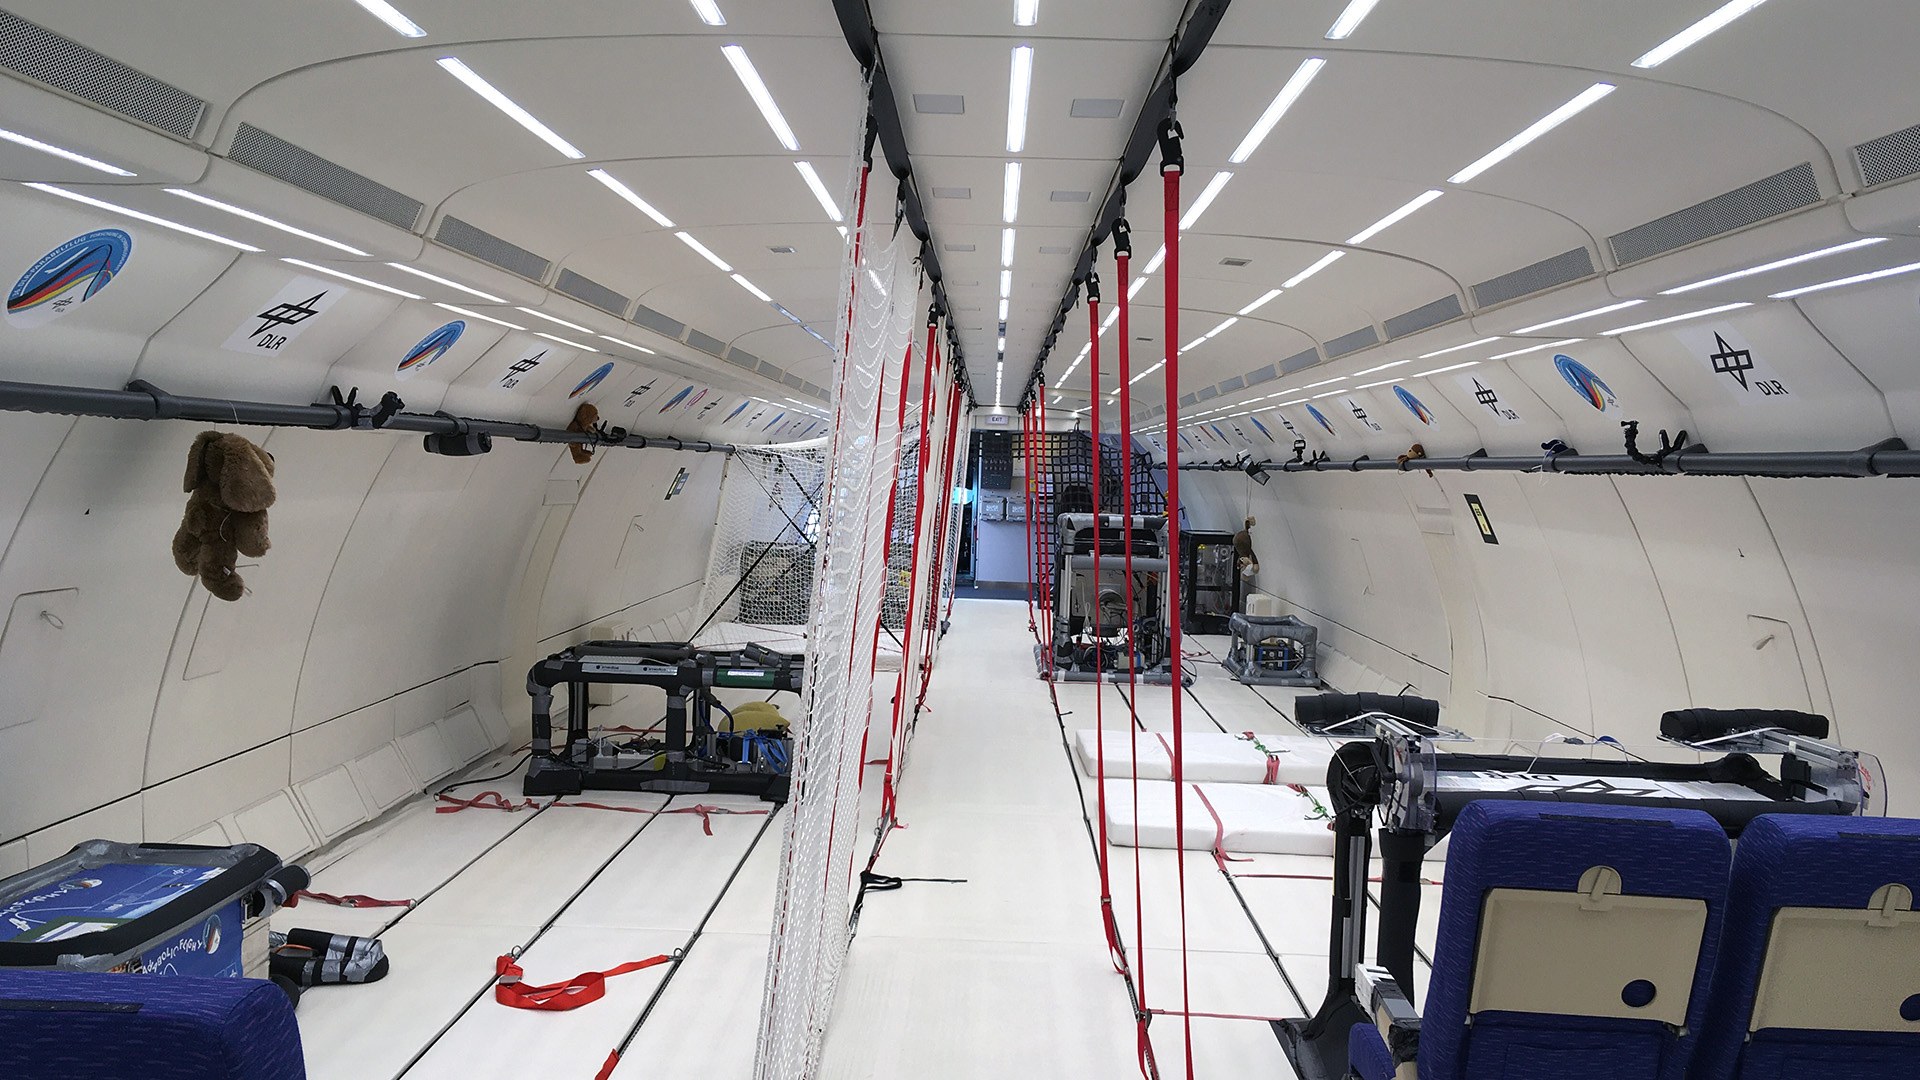 Experiments inside the aircraft